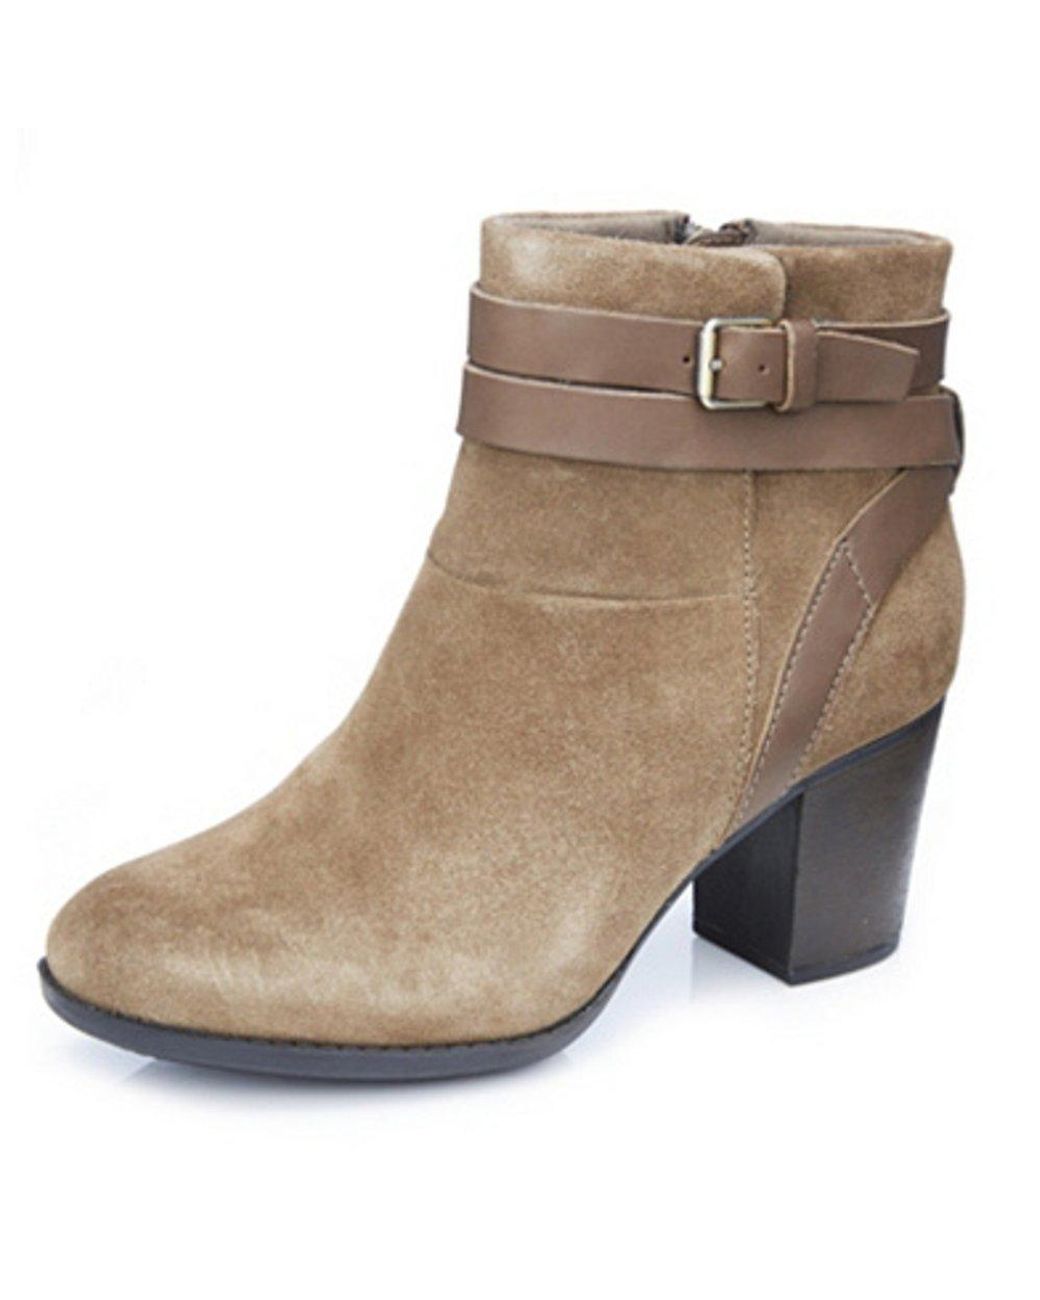 Clarks Enfield River Ankle Boot With Buckle Detail in Brown | Lyst UK